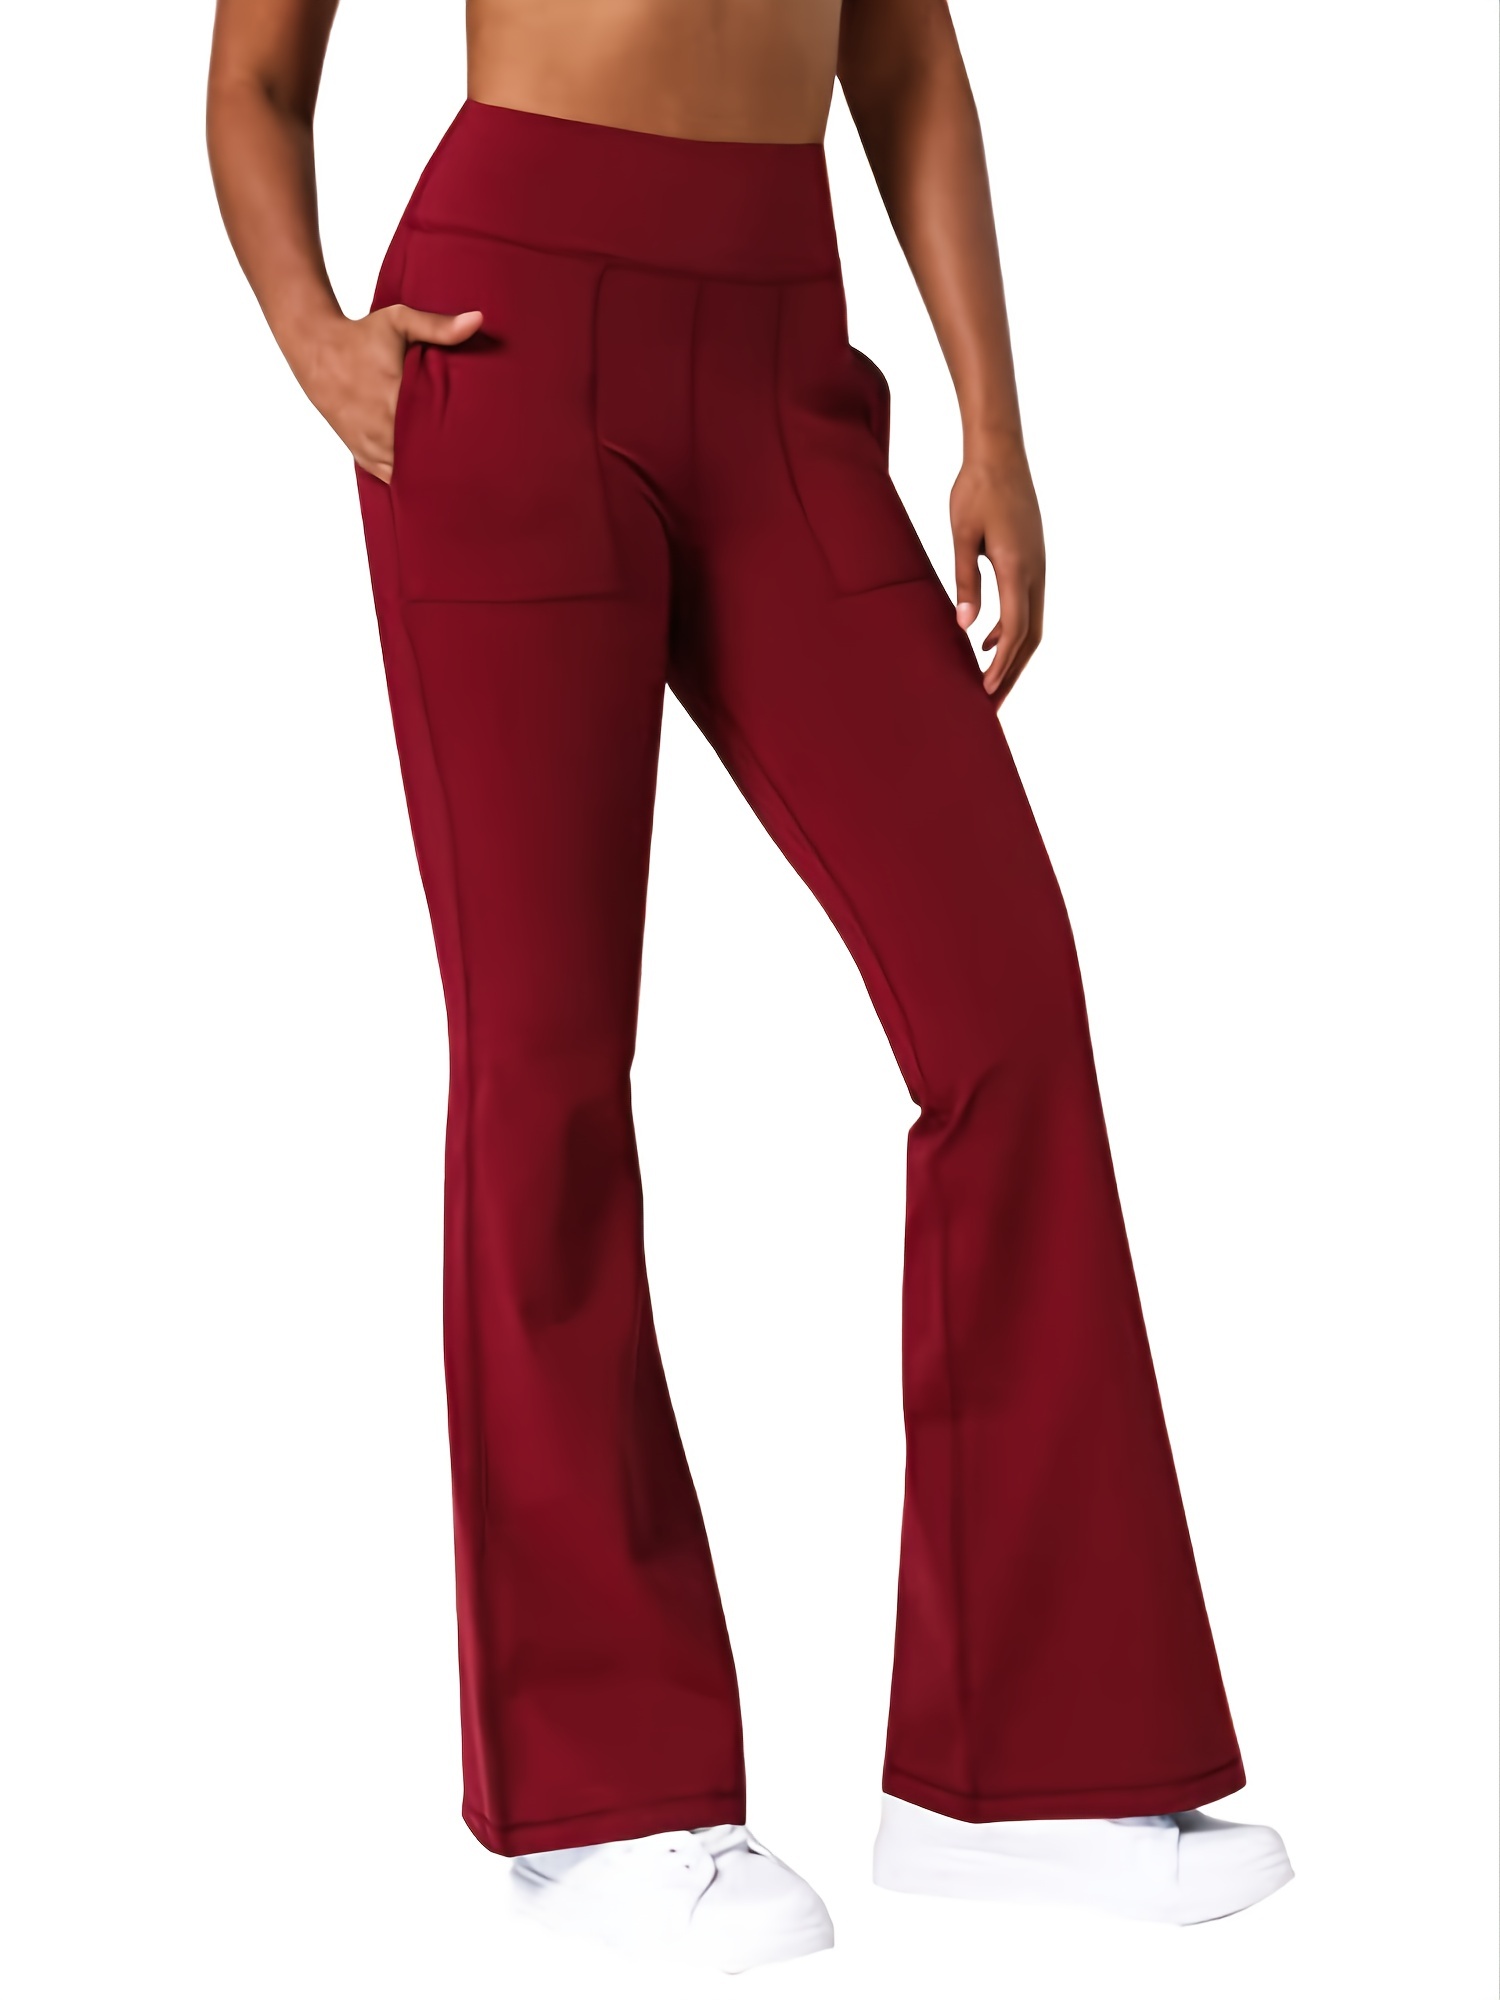 Women's Thermal Flare Pants